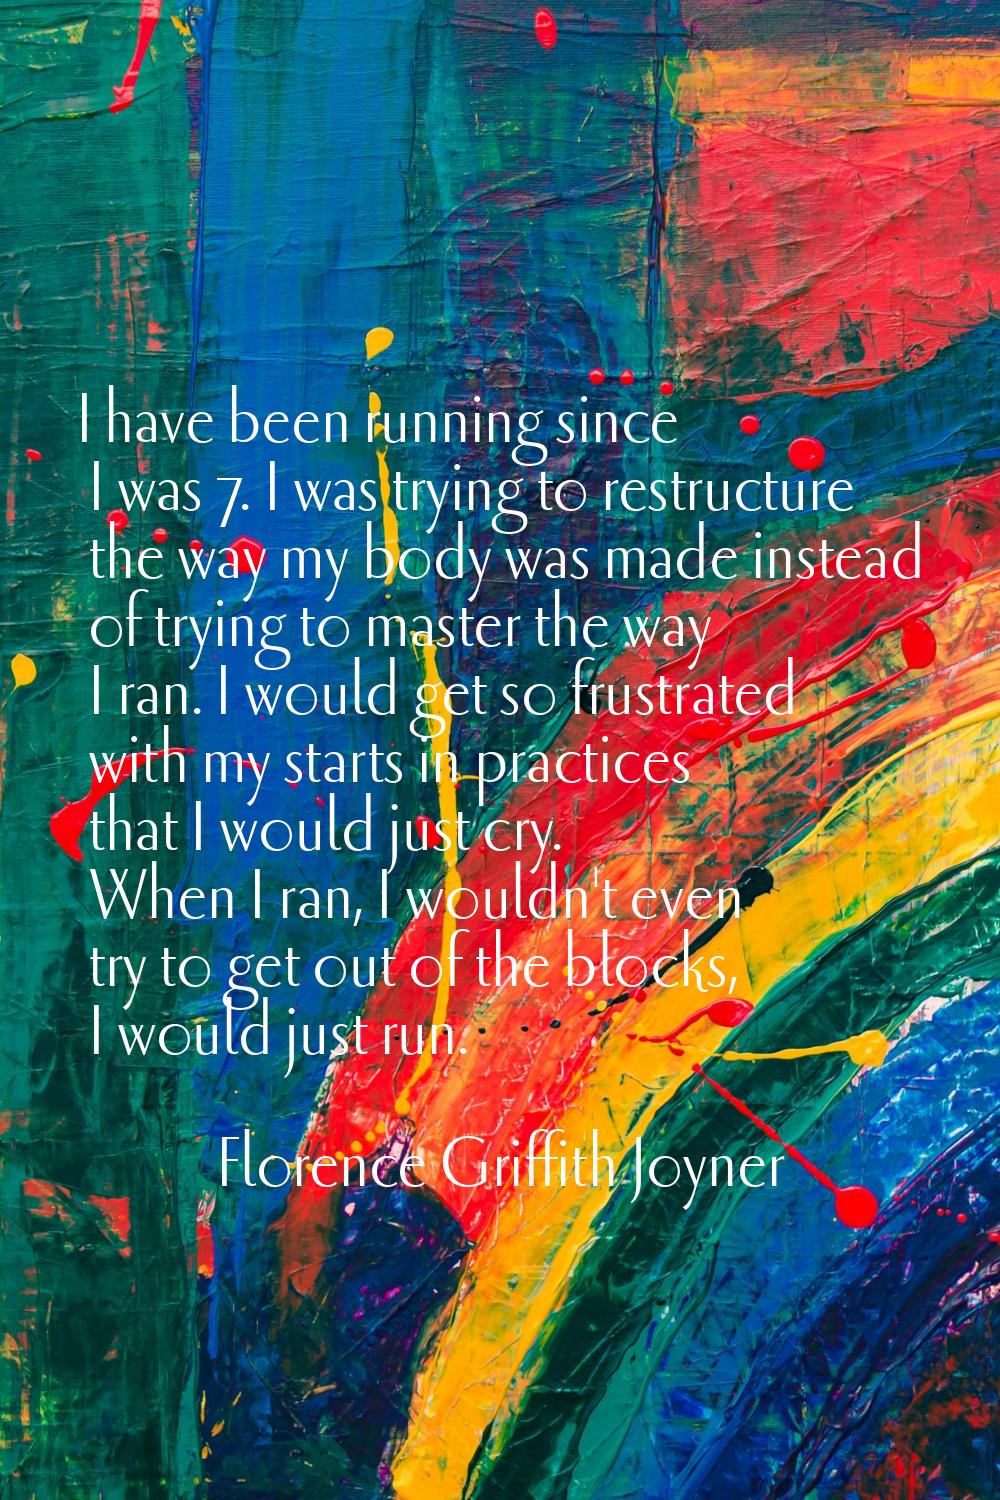 I have been running since I was 7. I was trying to restructure the way my body was made instead of 